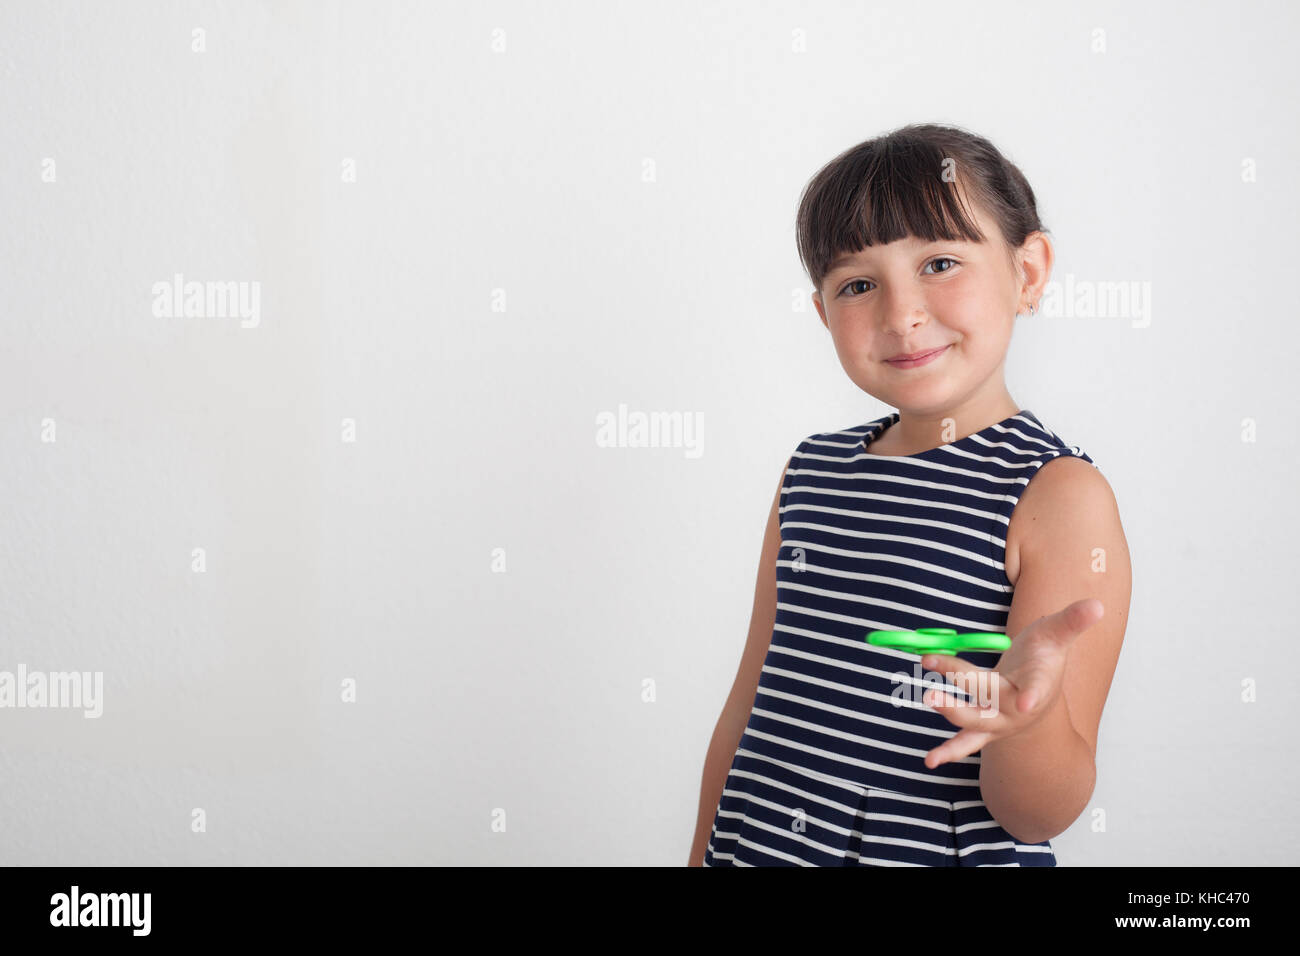 The 7 years old girl using a green fidget spinner against white backdrop. Stock Photo